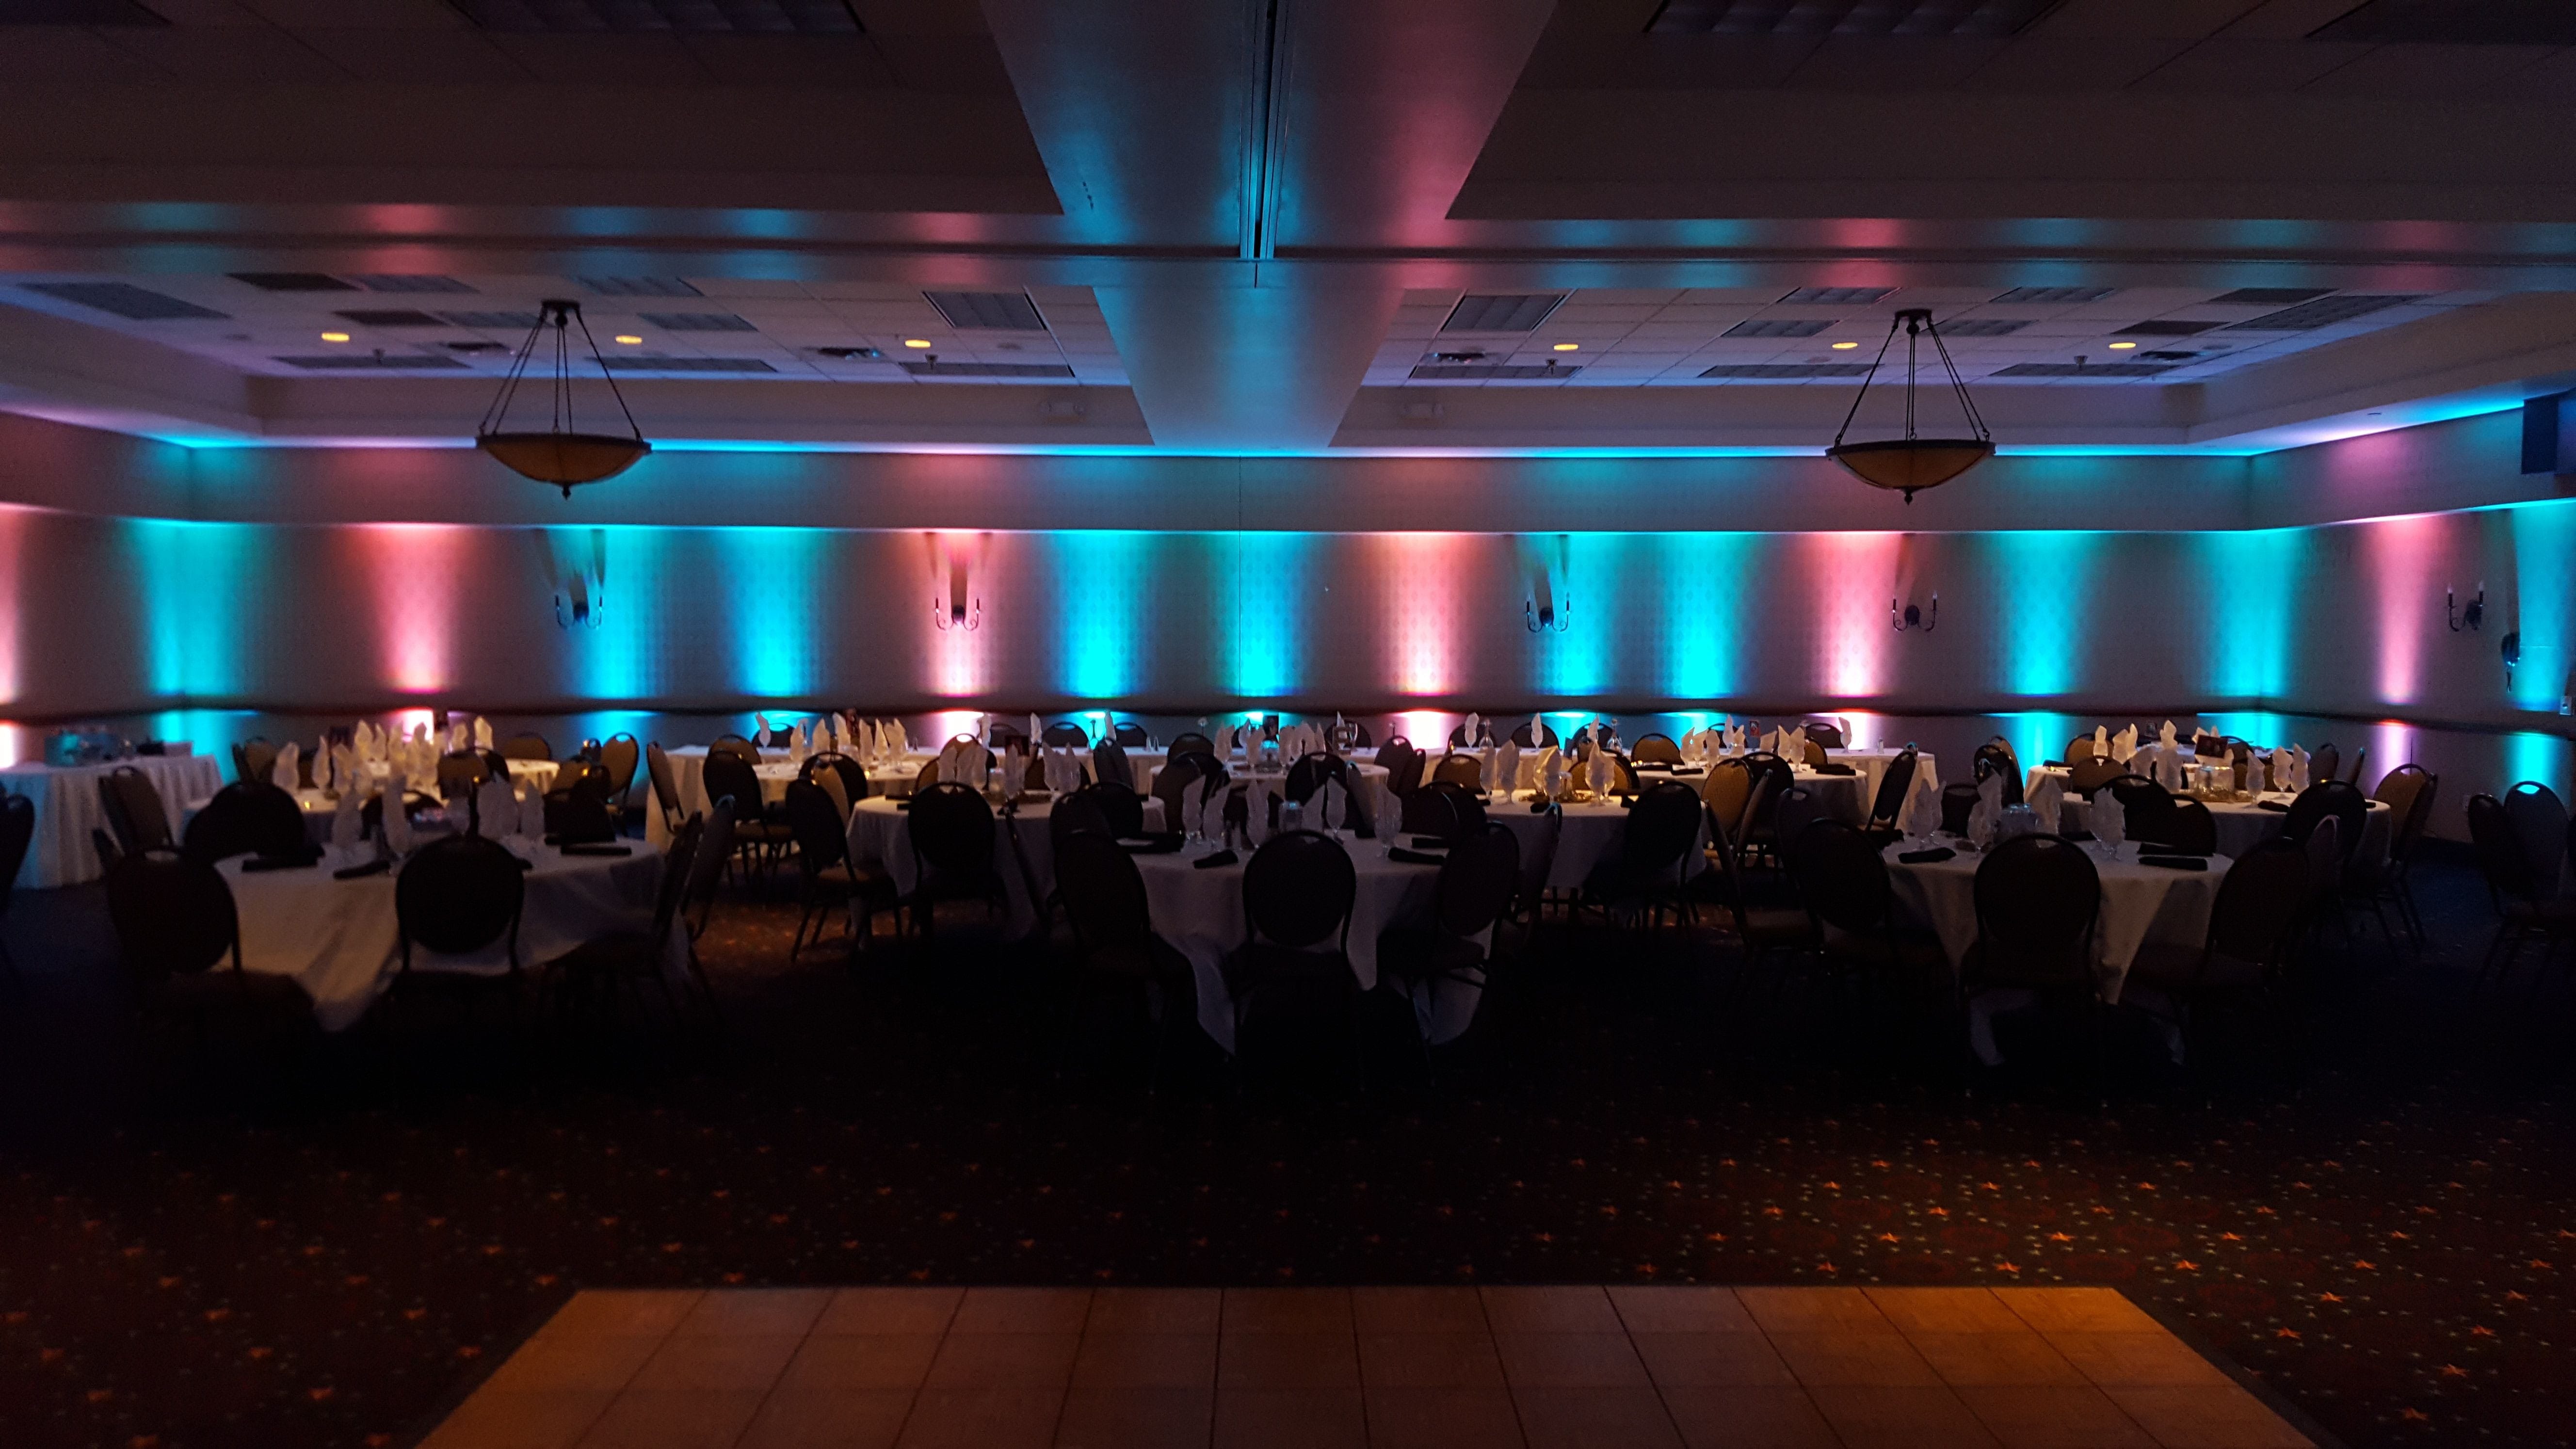 Inn on Lake Superior.
Wedding lighting in teal and coral.